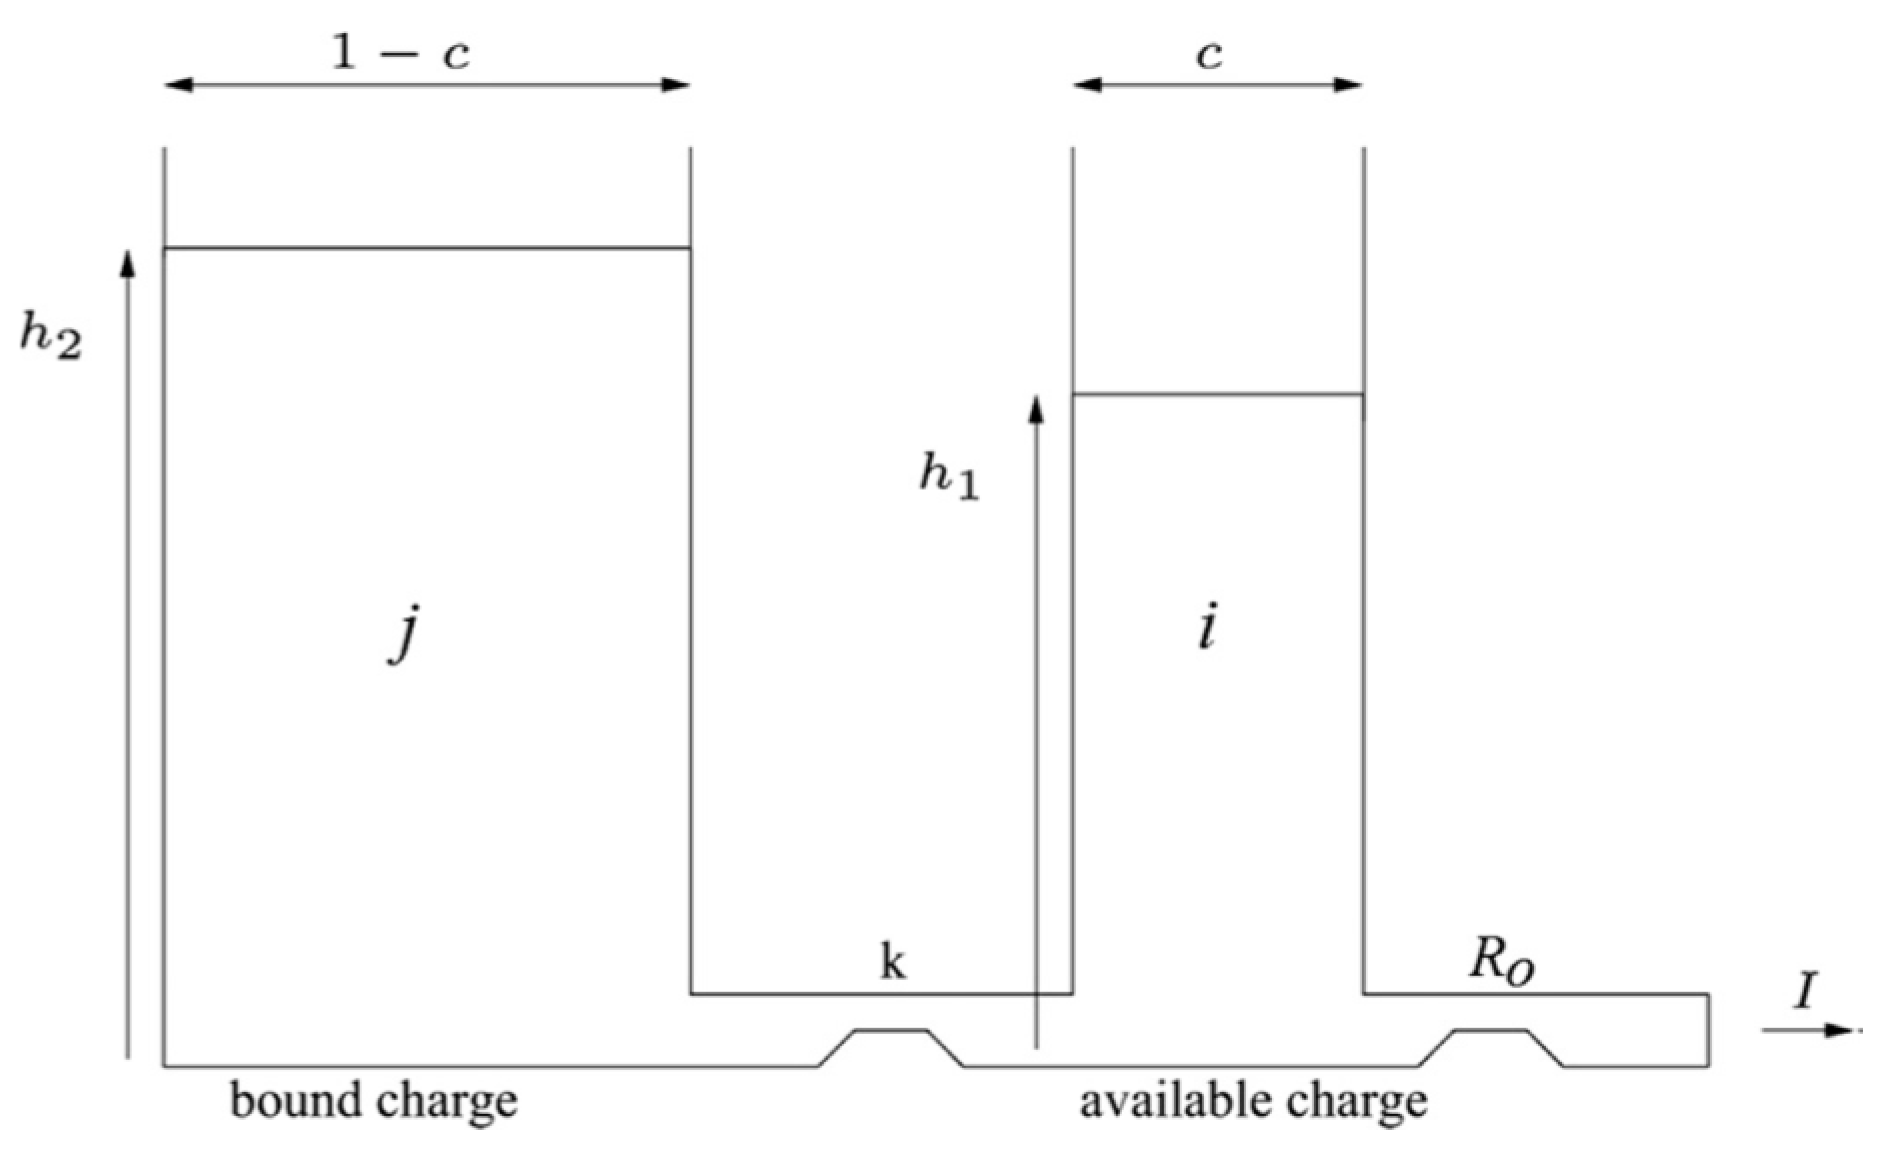 Energies | Free Full-Text | Lithium Ion Battery Models and Parameter  Identification Techniques